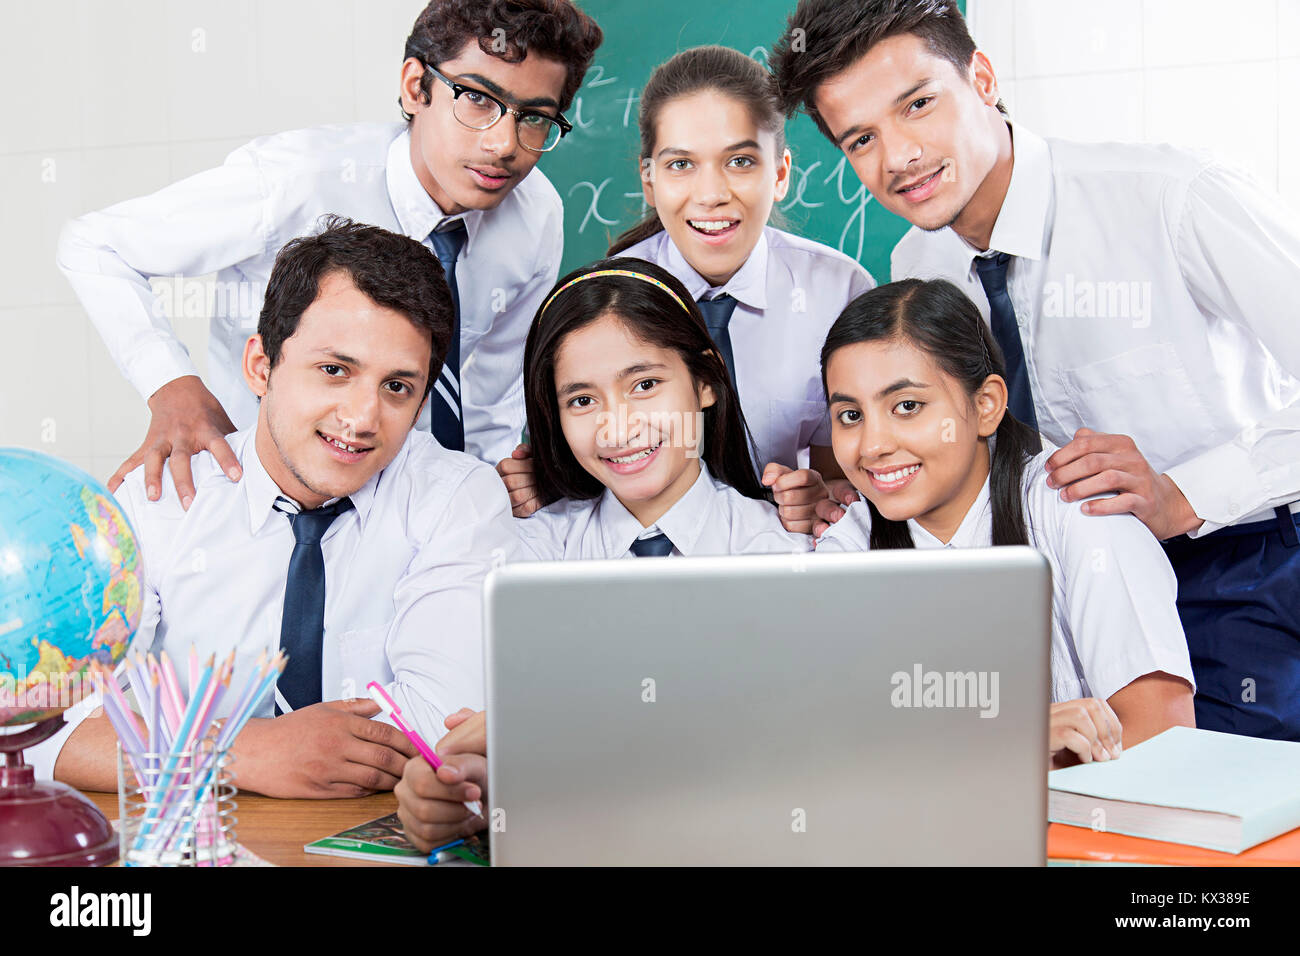 Indian School Young Students Using Laptop Studying Educaton Learning Class Stock Photo